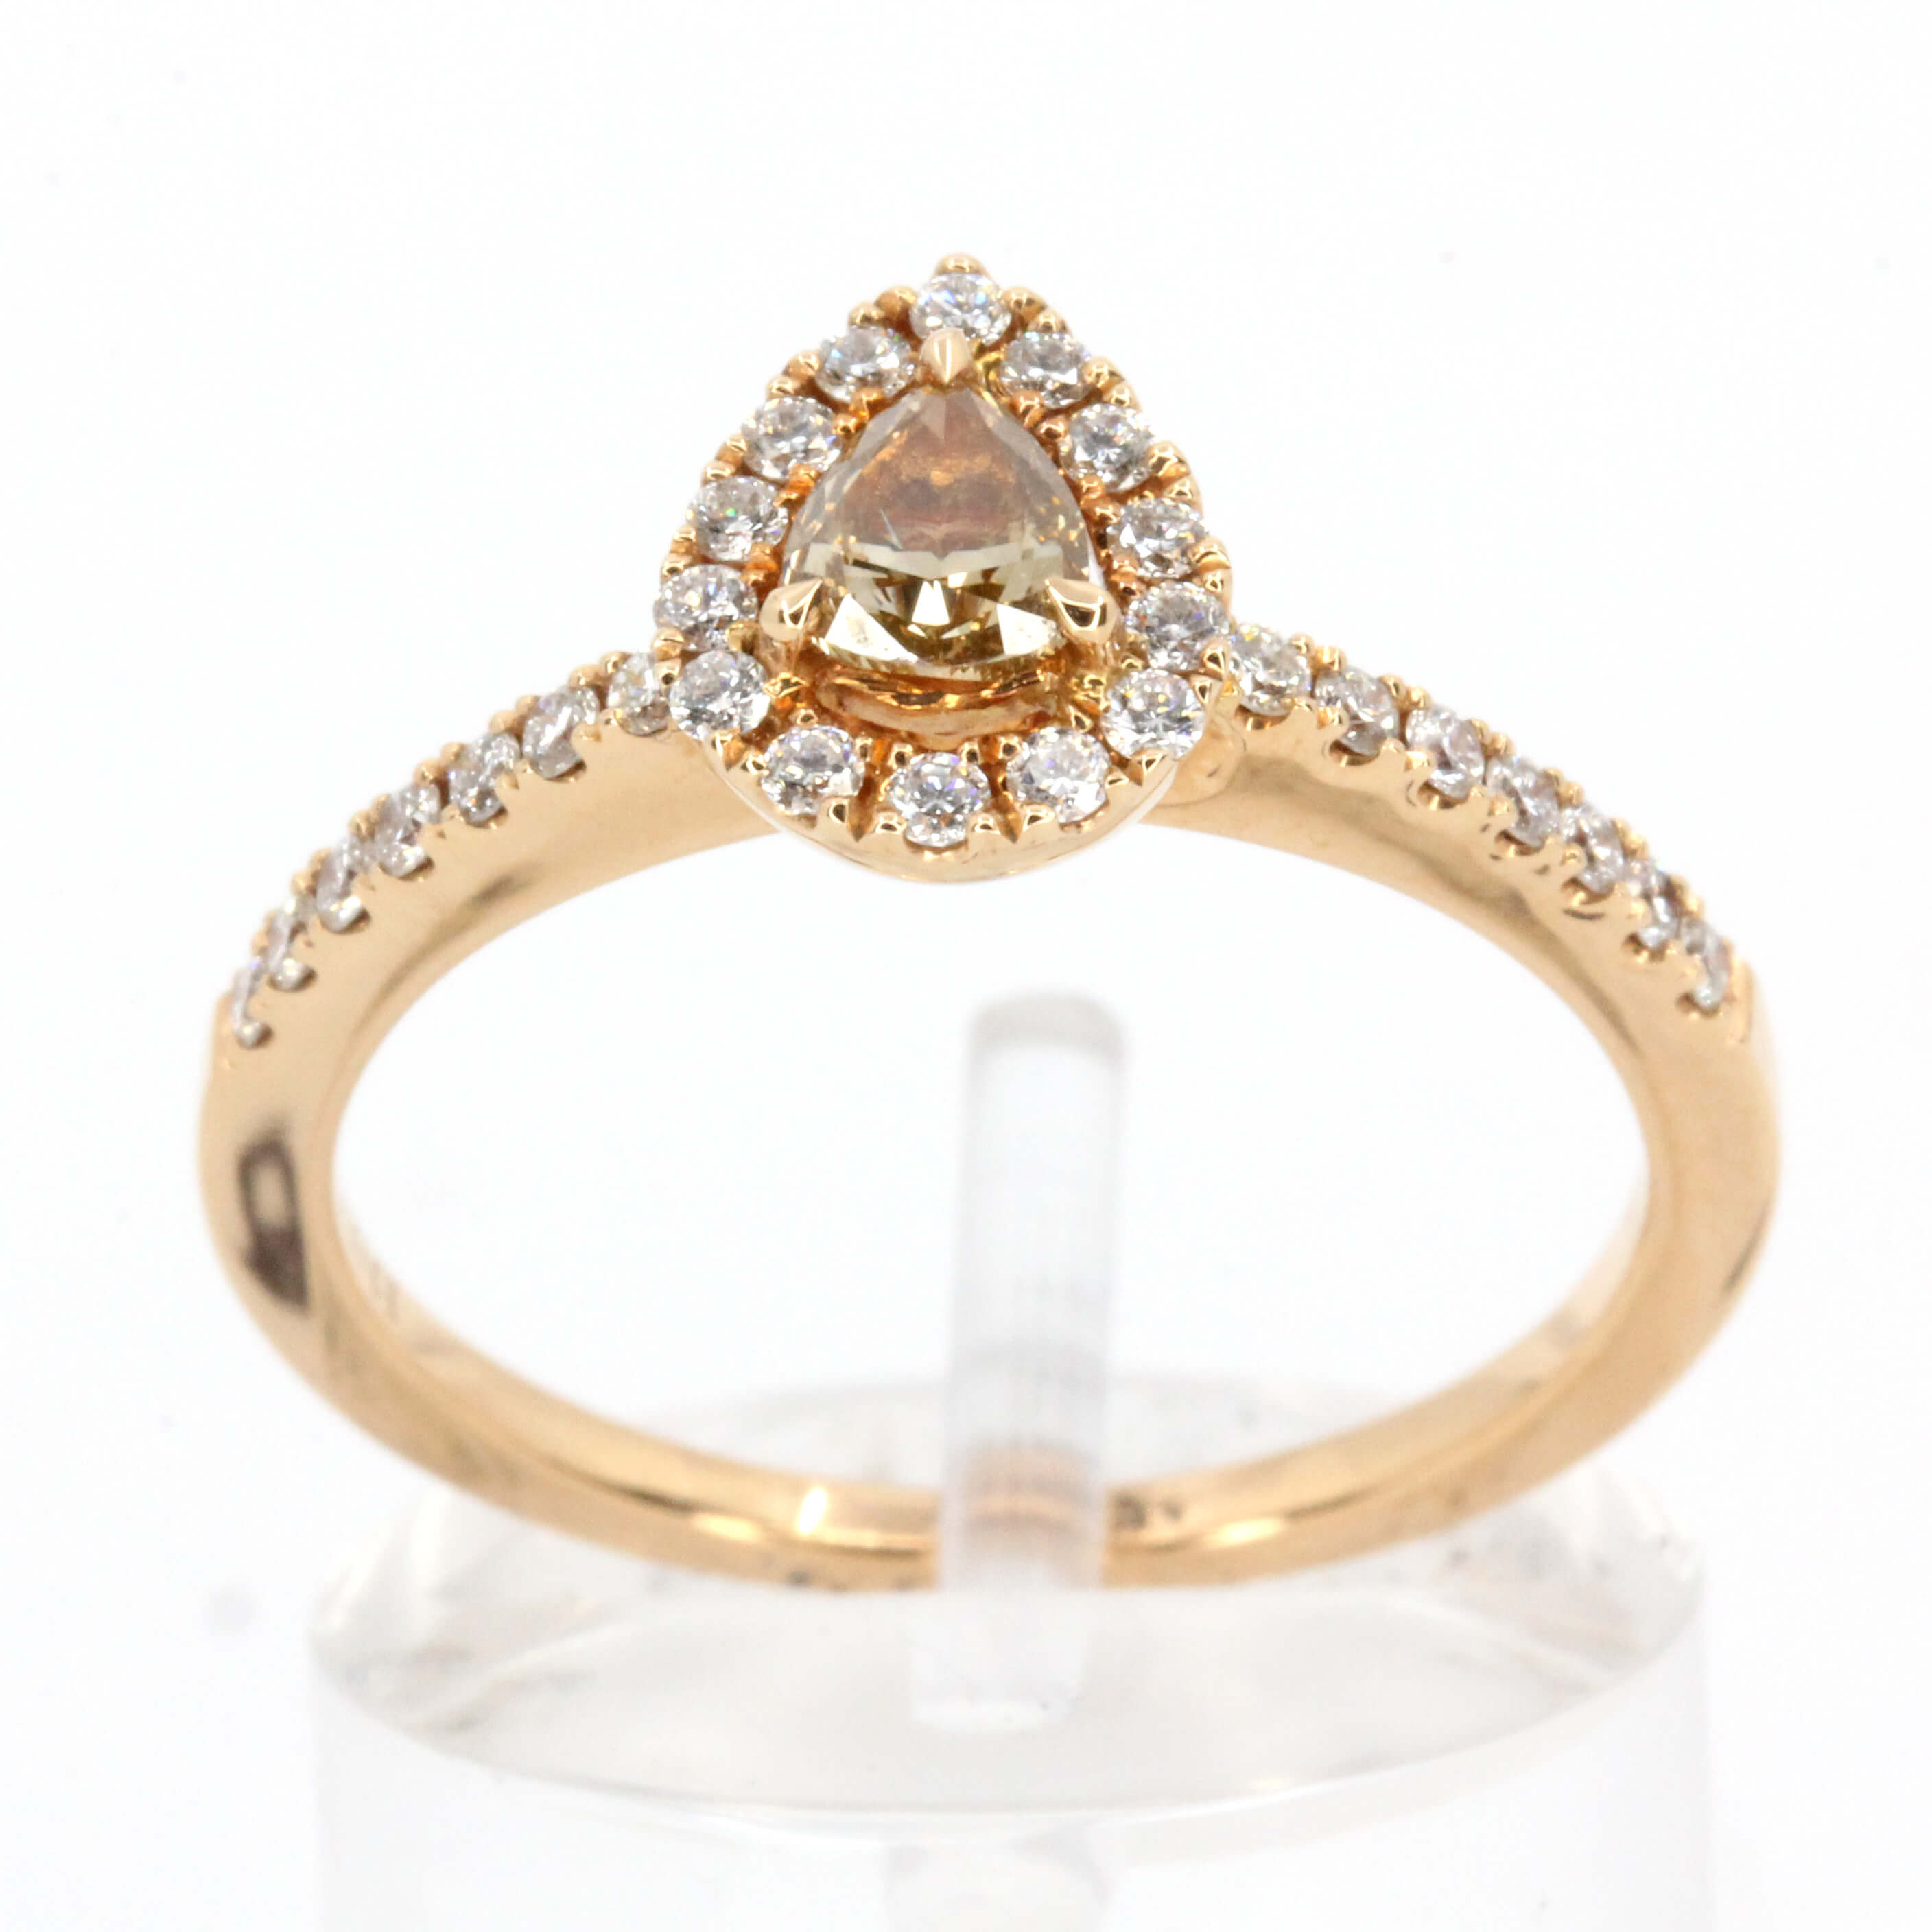 Chocolate Diamond Ring with Diamonds set in 18ct Rose Gold